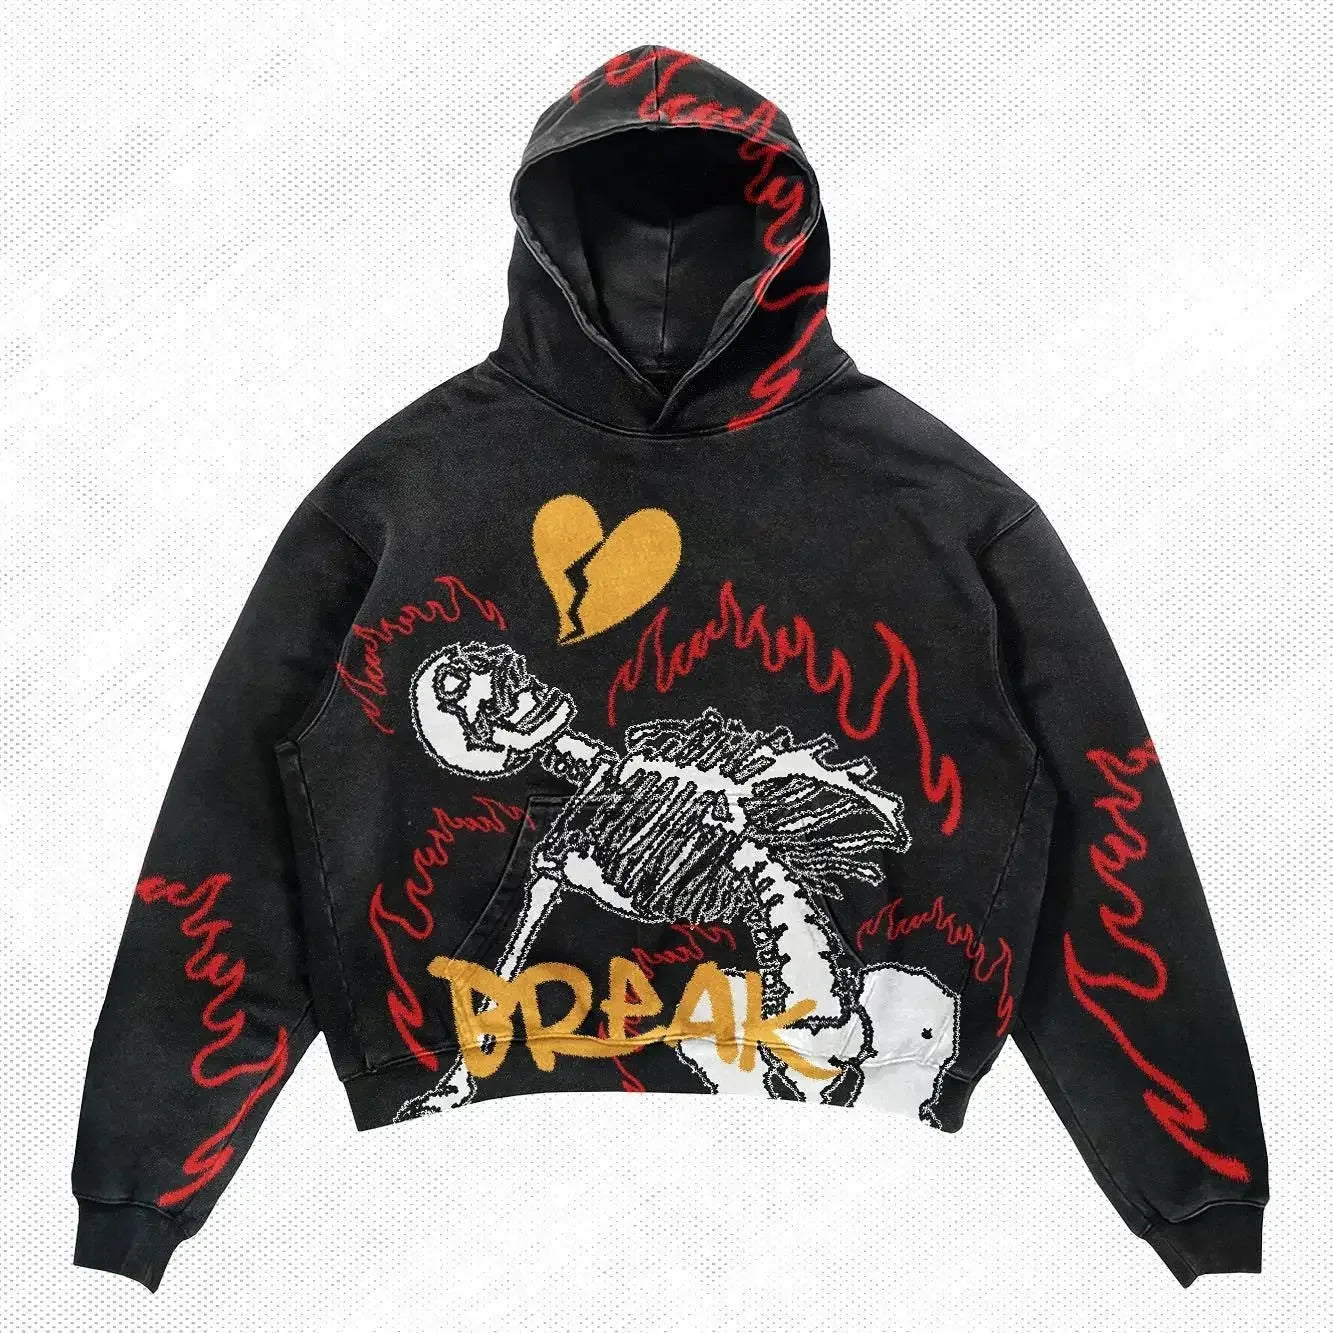 This Maramalive™ Explosions Printed Skull Y2K Retro Hooded Sweater Coat Street Style Gothic Casual Fashion Hooded Sweater Men's Female features a skeleton graphic with flames and a broken heart in the background, along with the word "BREAK" in bold yellow letters on the front. Suitable for men and perfect for all four seasons.